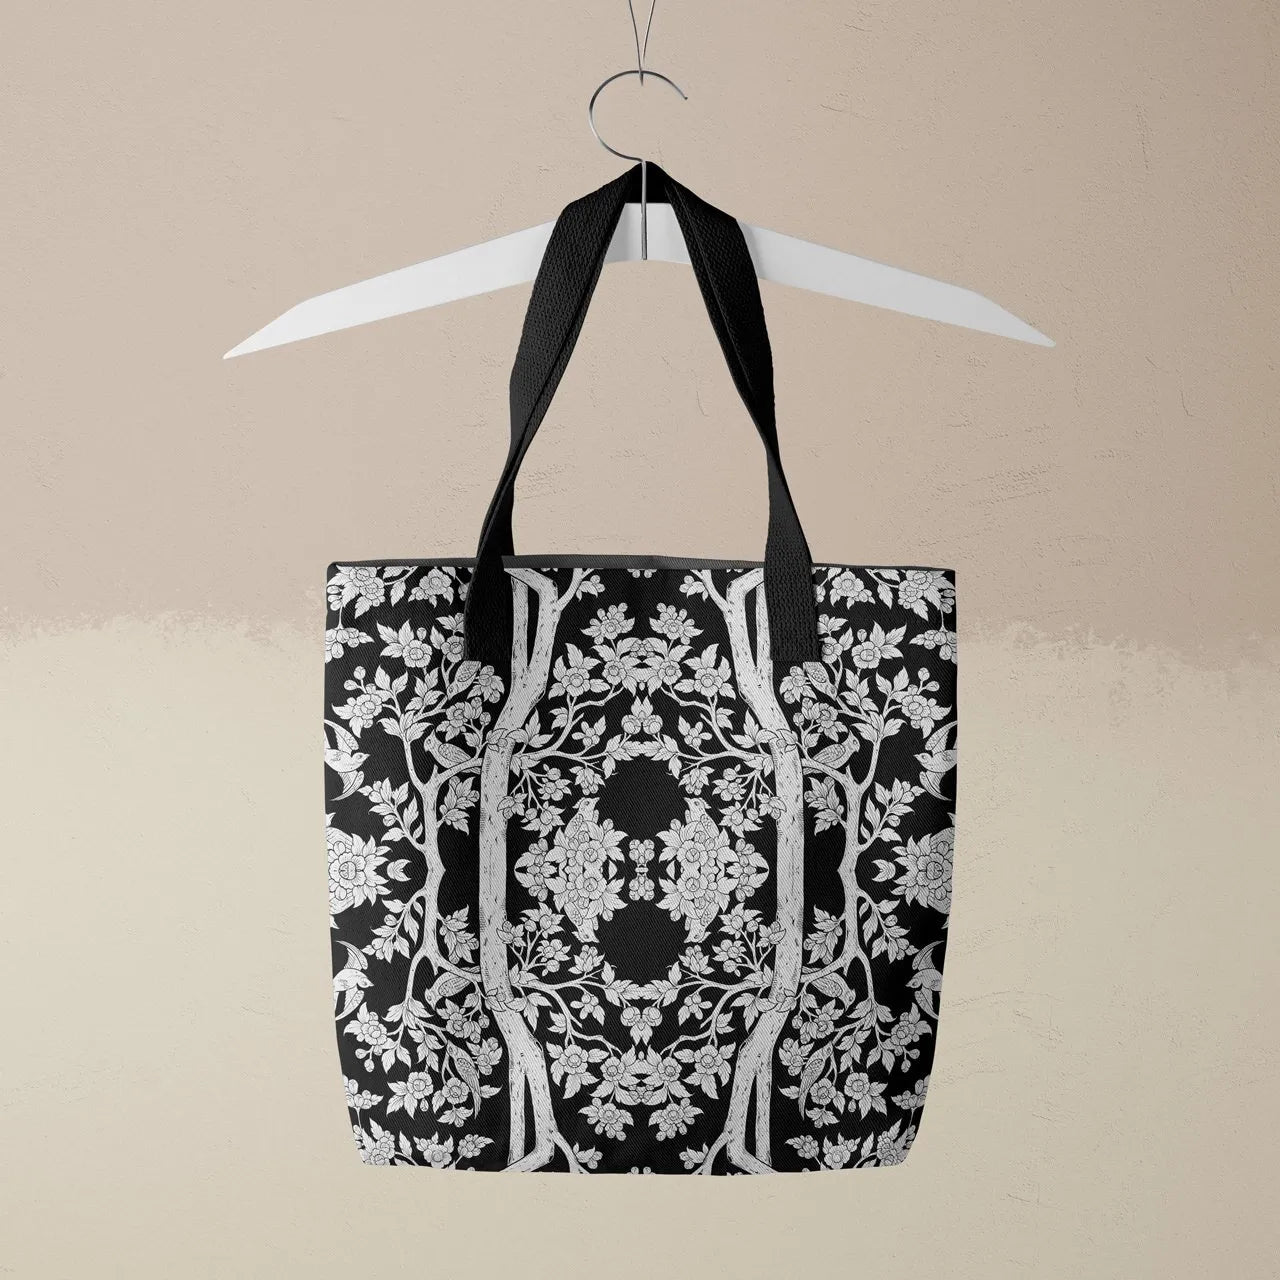 Aviary Tote - Raven - Heavy Duty Reusable Grocery Bag - Shopping Totes - Aesthetic Art